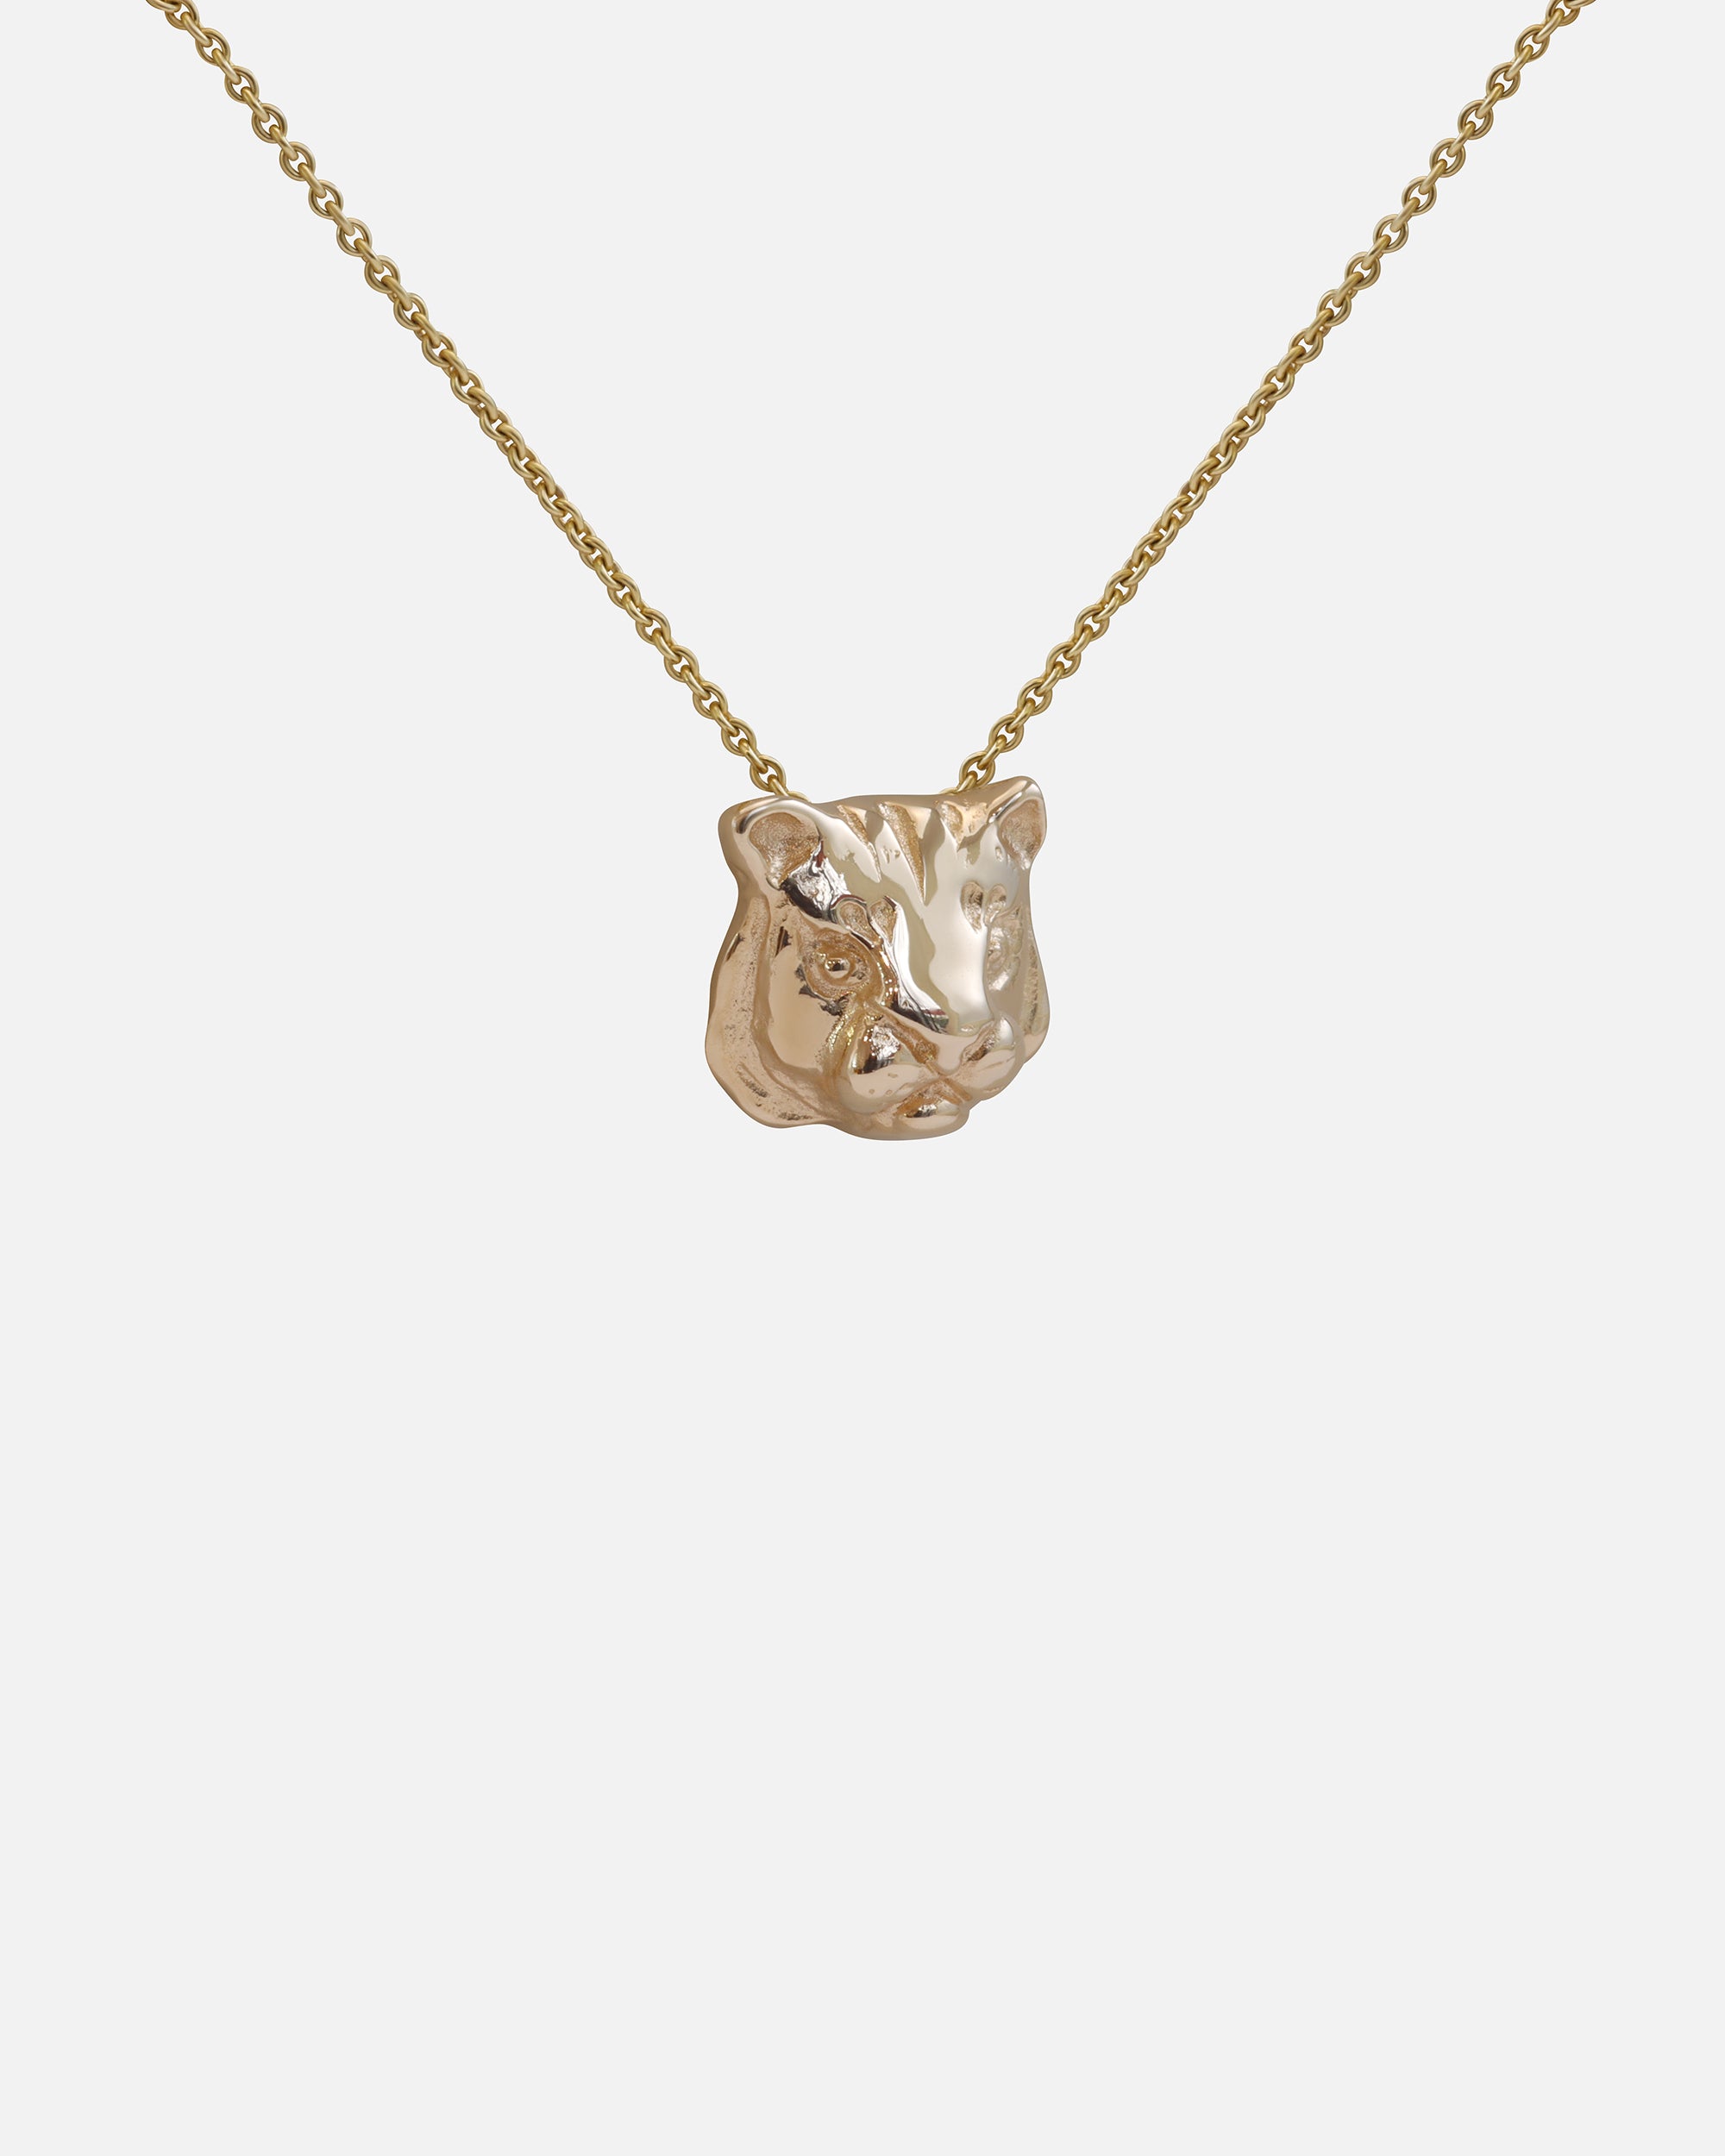 Horangi / Tiger Pendant By Young Sun Song in pendants Category